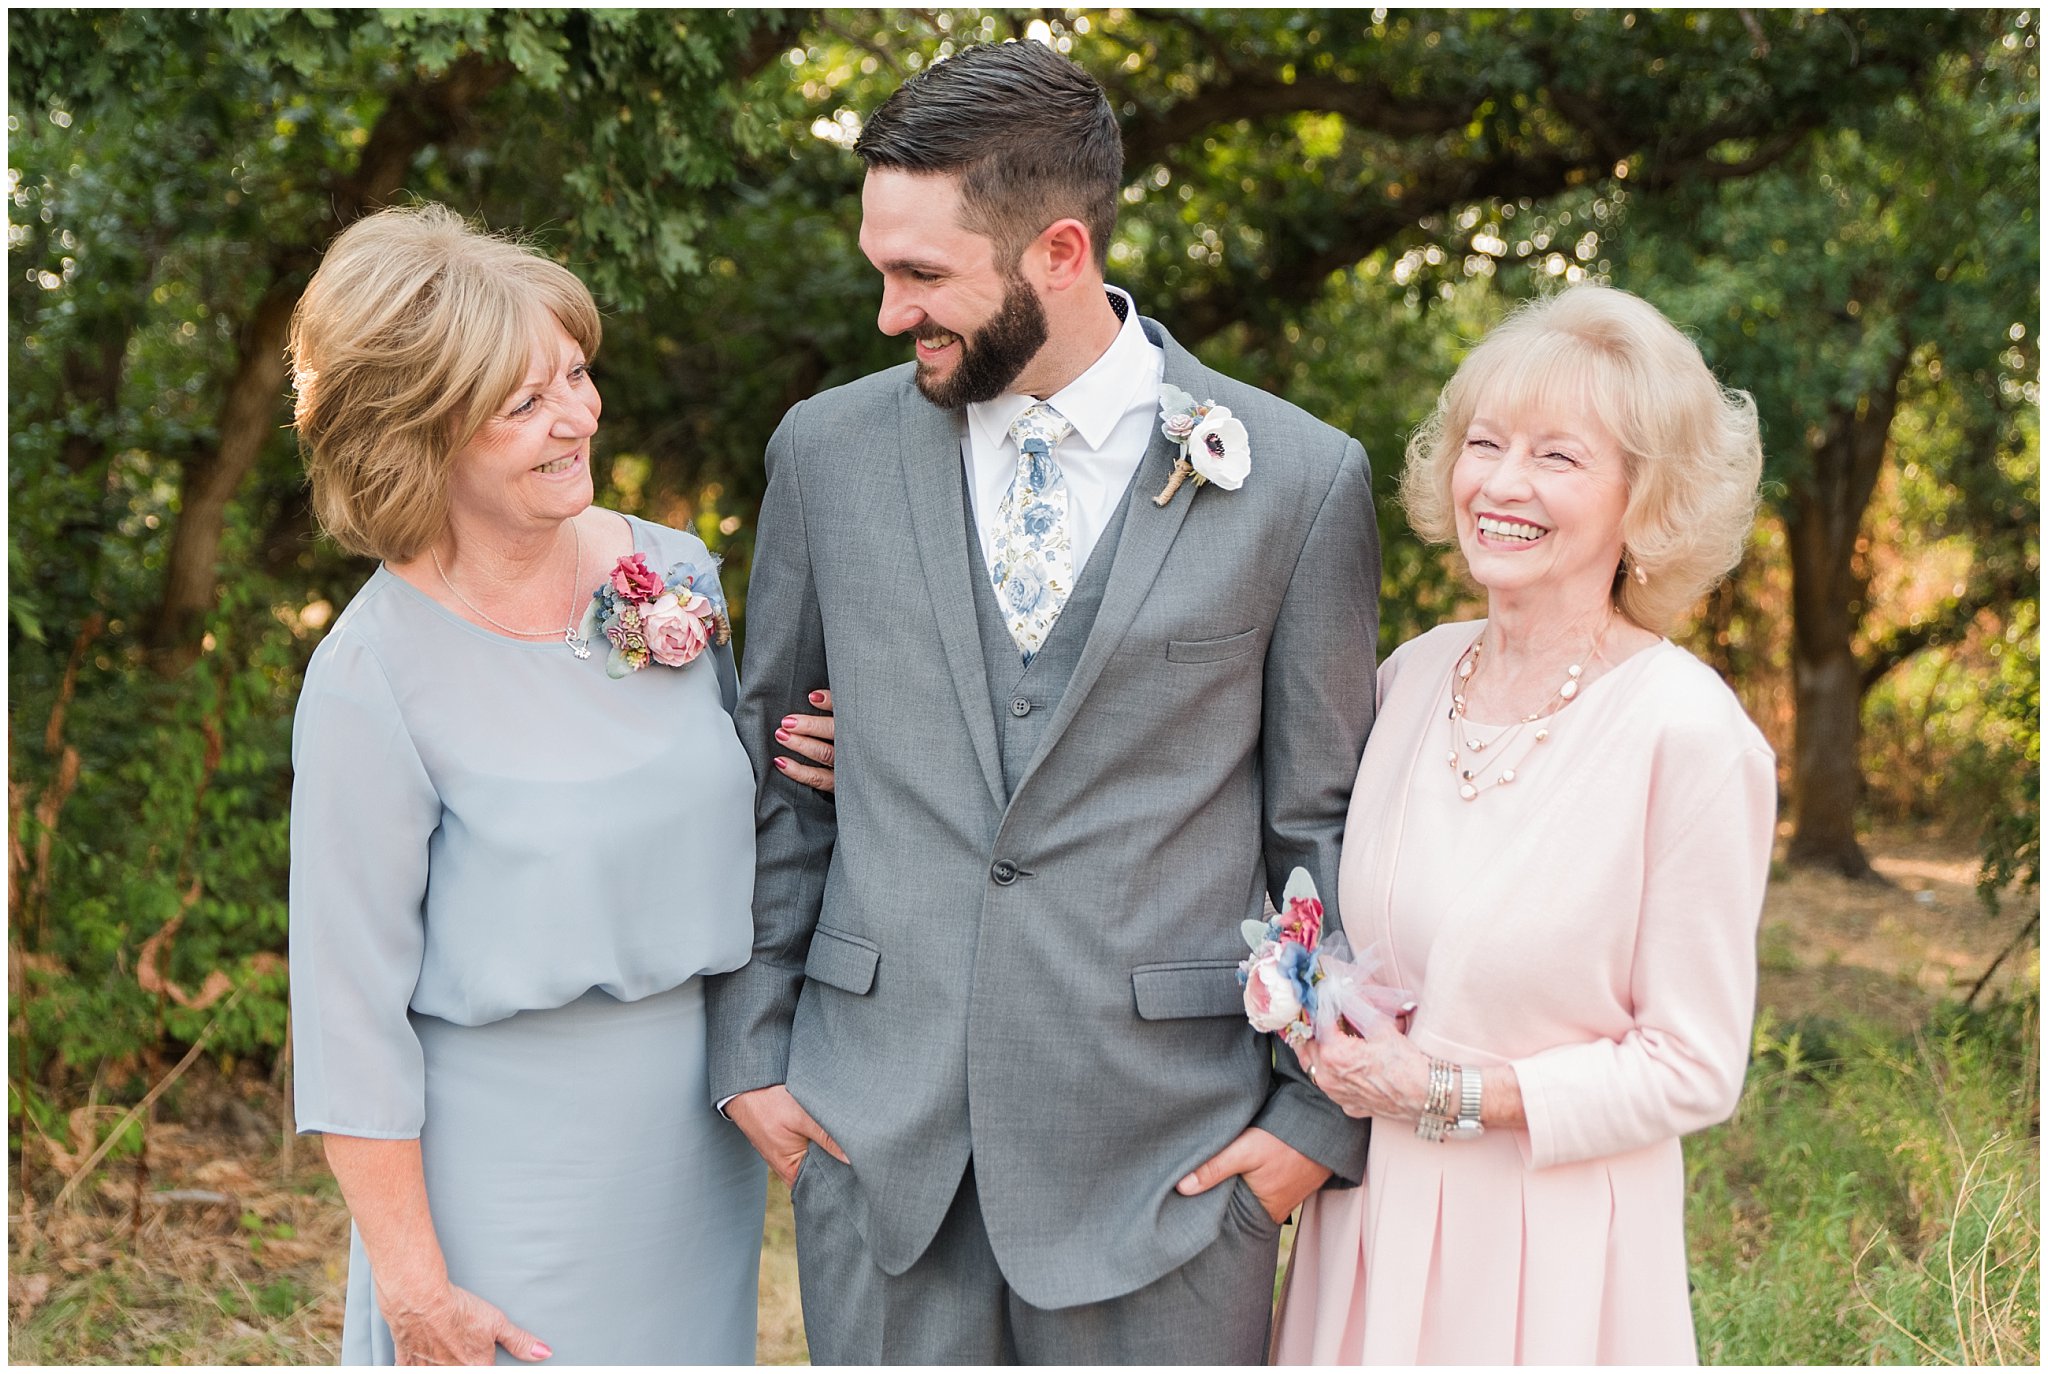 Family Photos | Dusty Blue and Rose Summer Wedding at Oak Hills Utah | Jessie and Dallin Photography